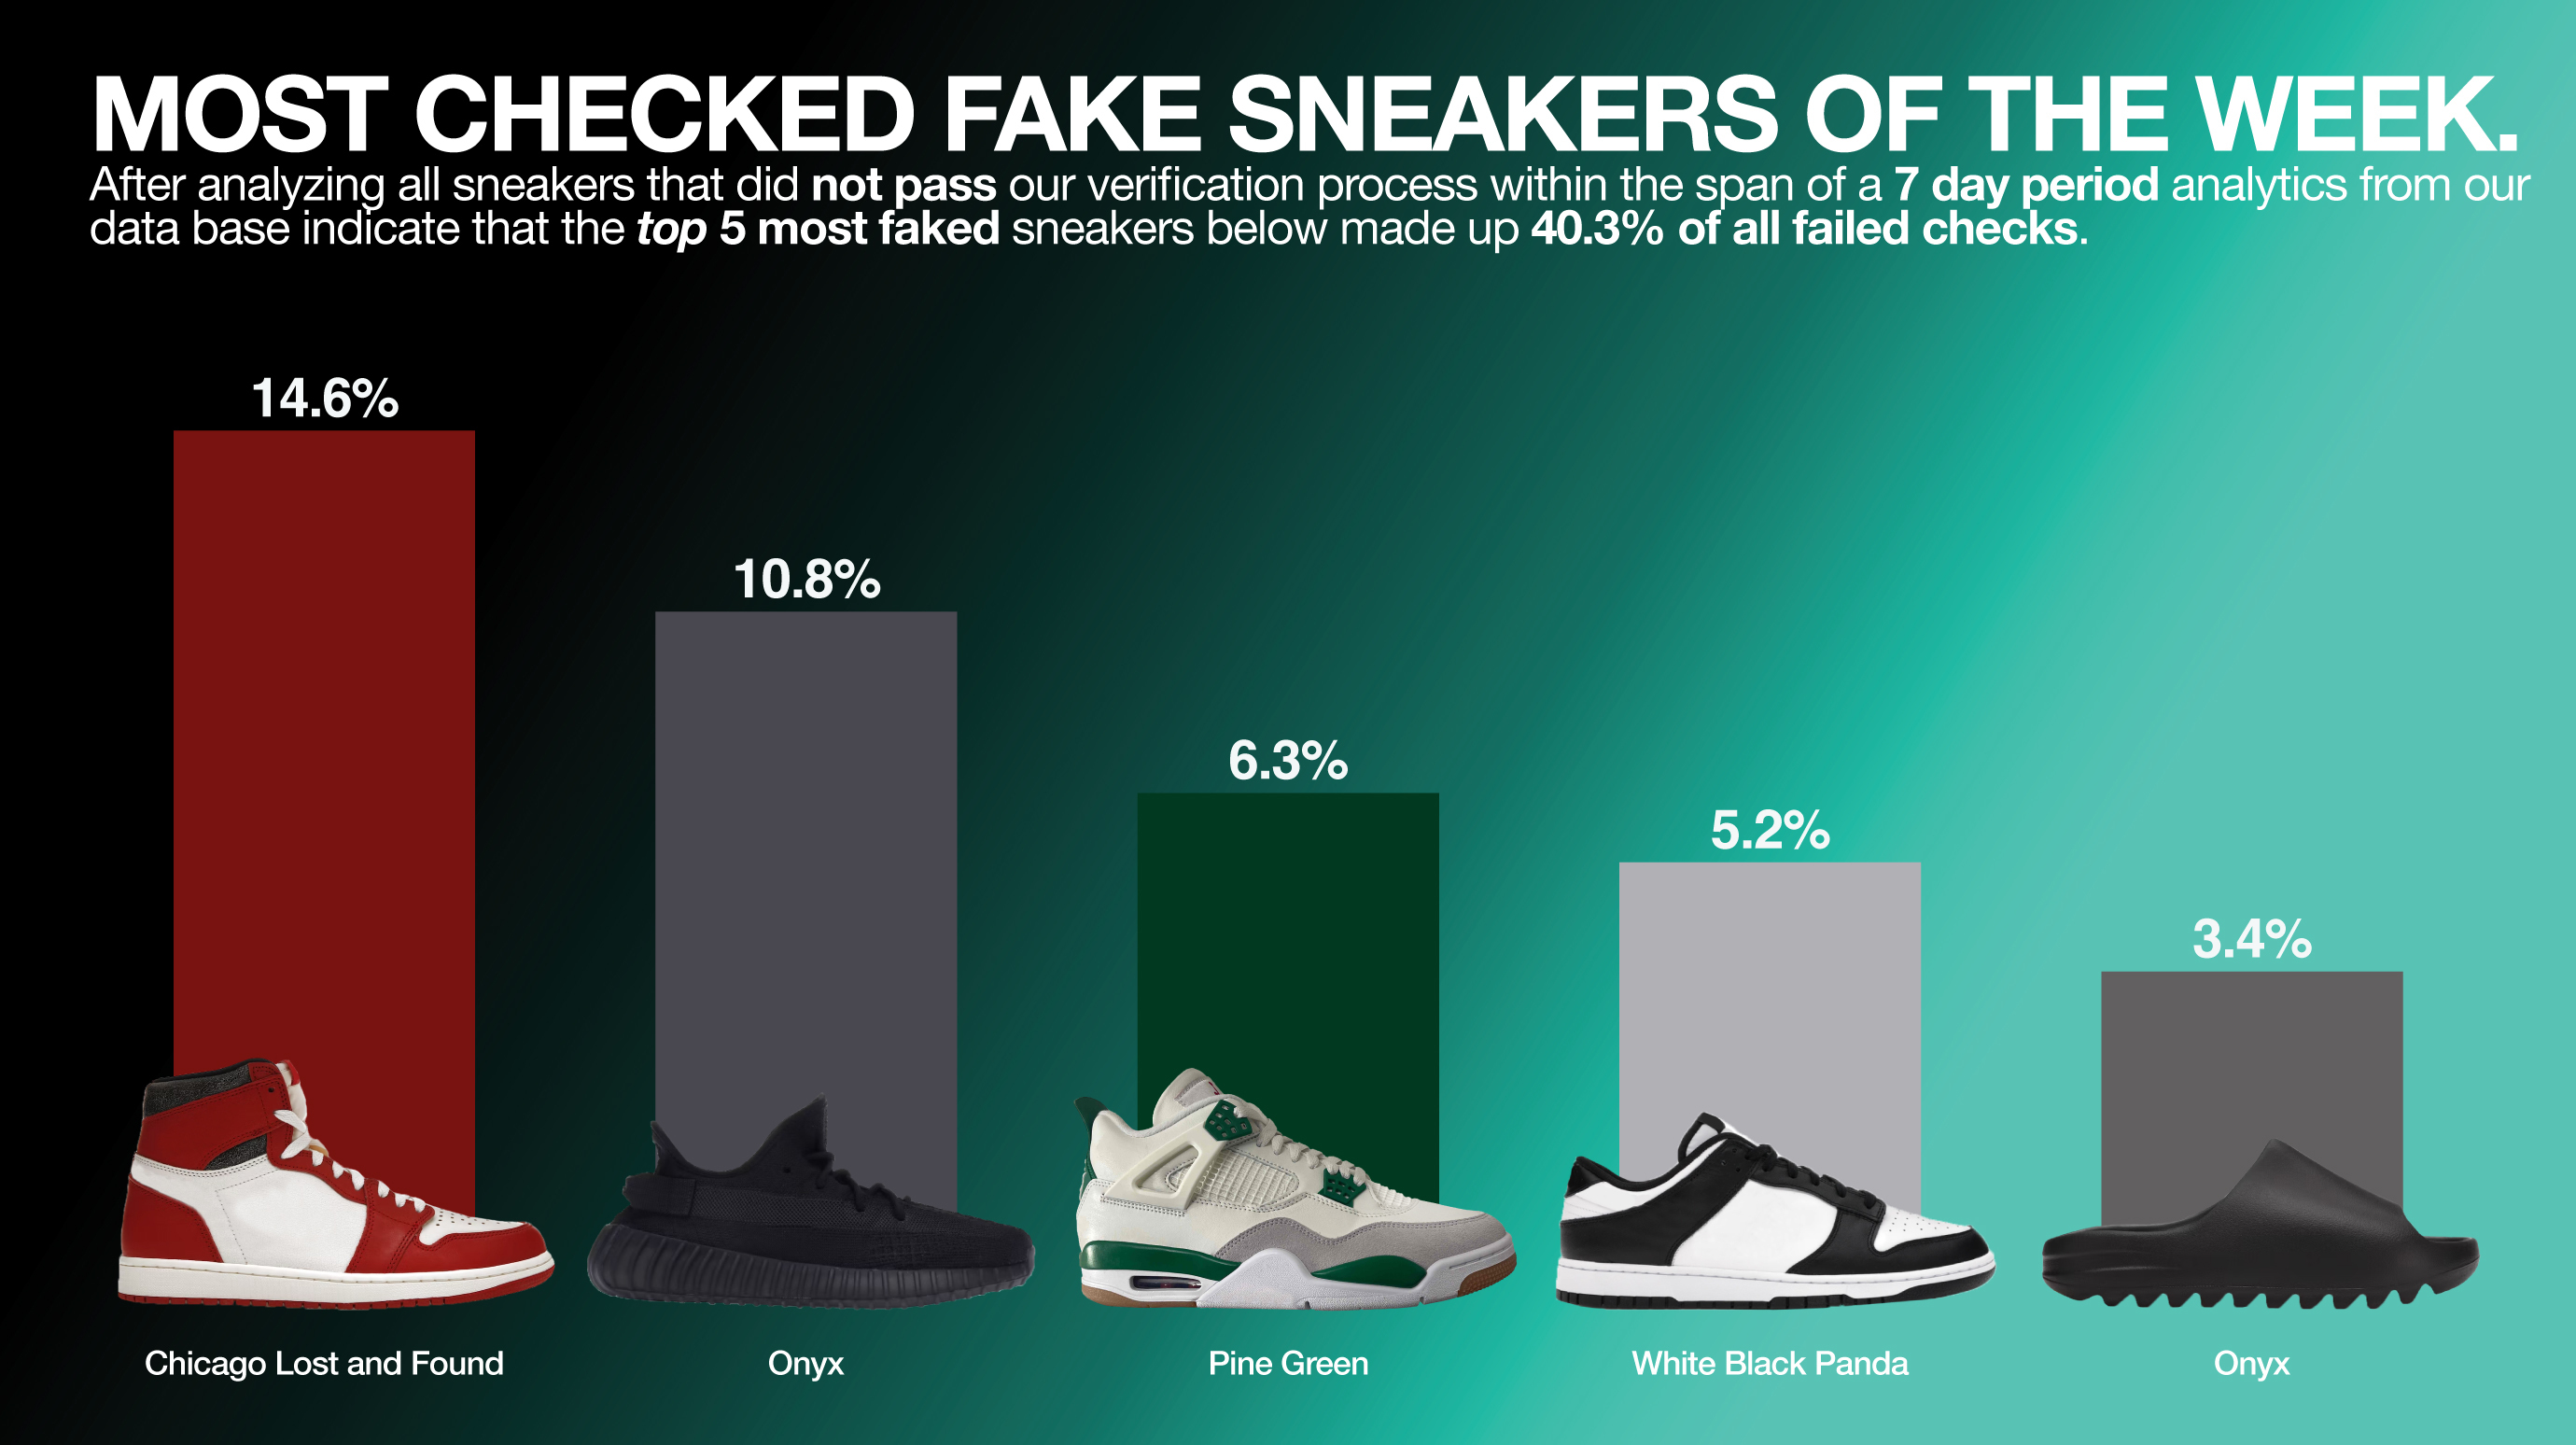 Fashion Fakes: AI can protect retailers tackling counterfeit